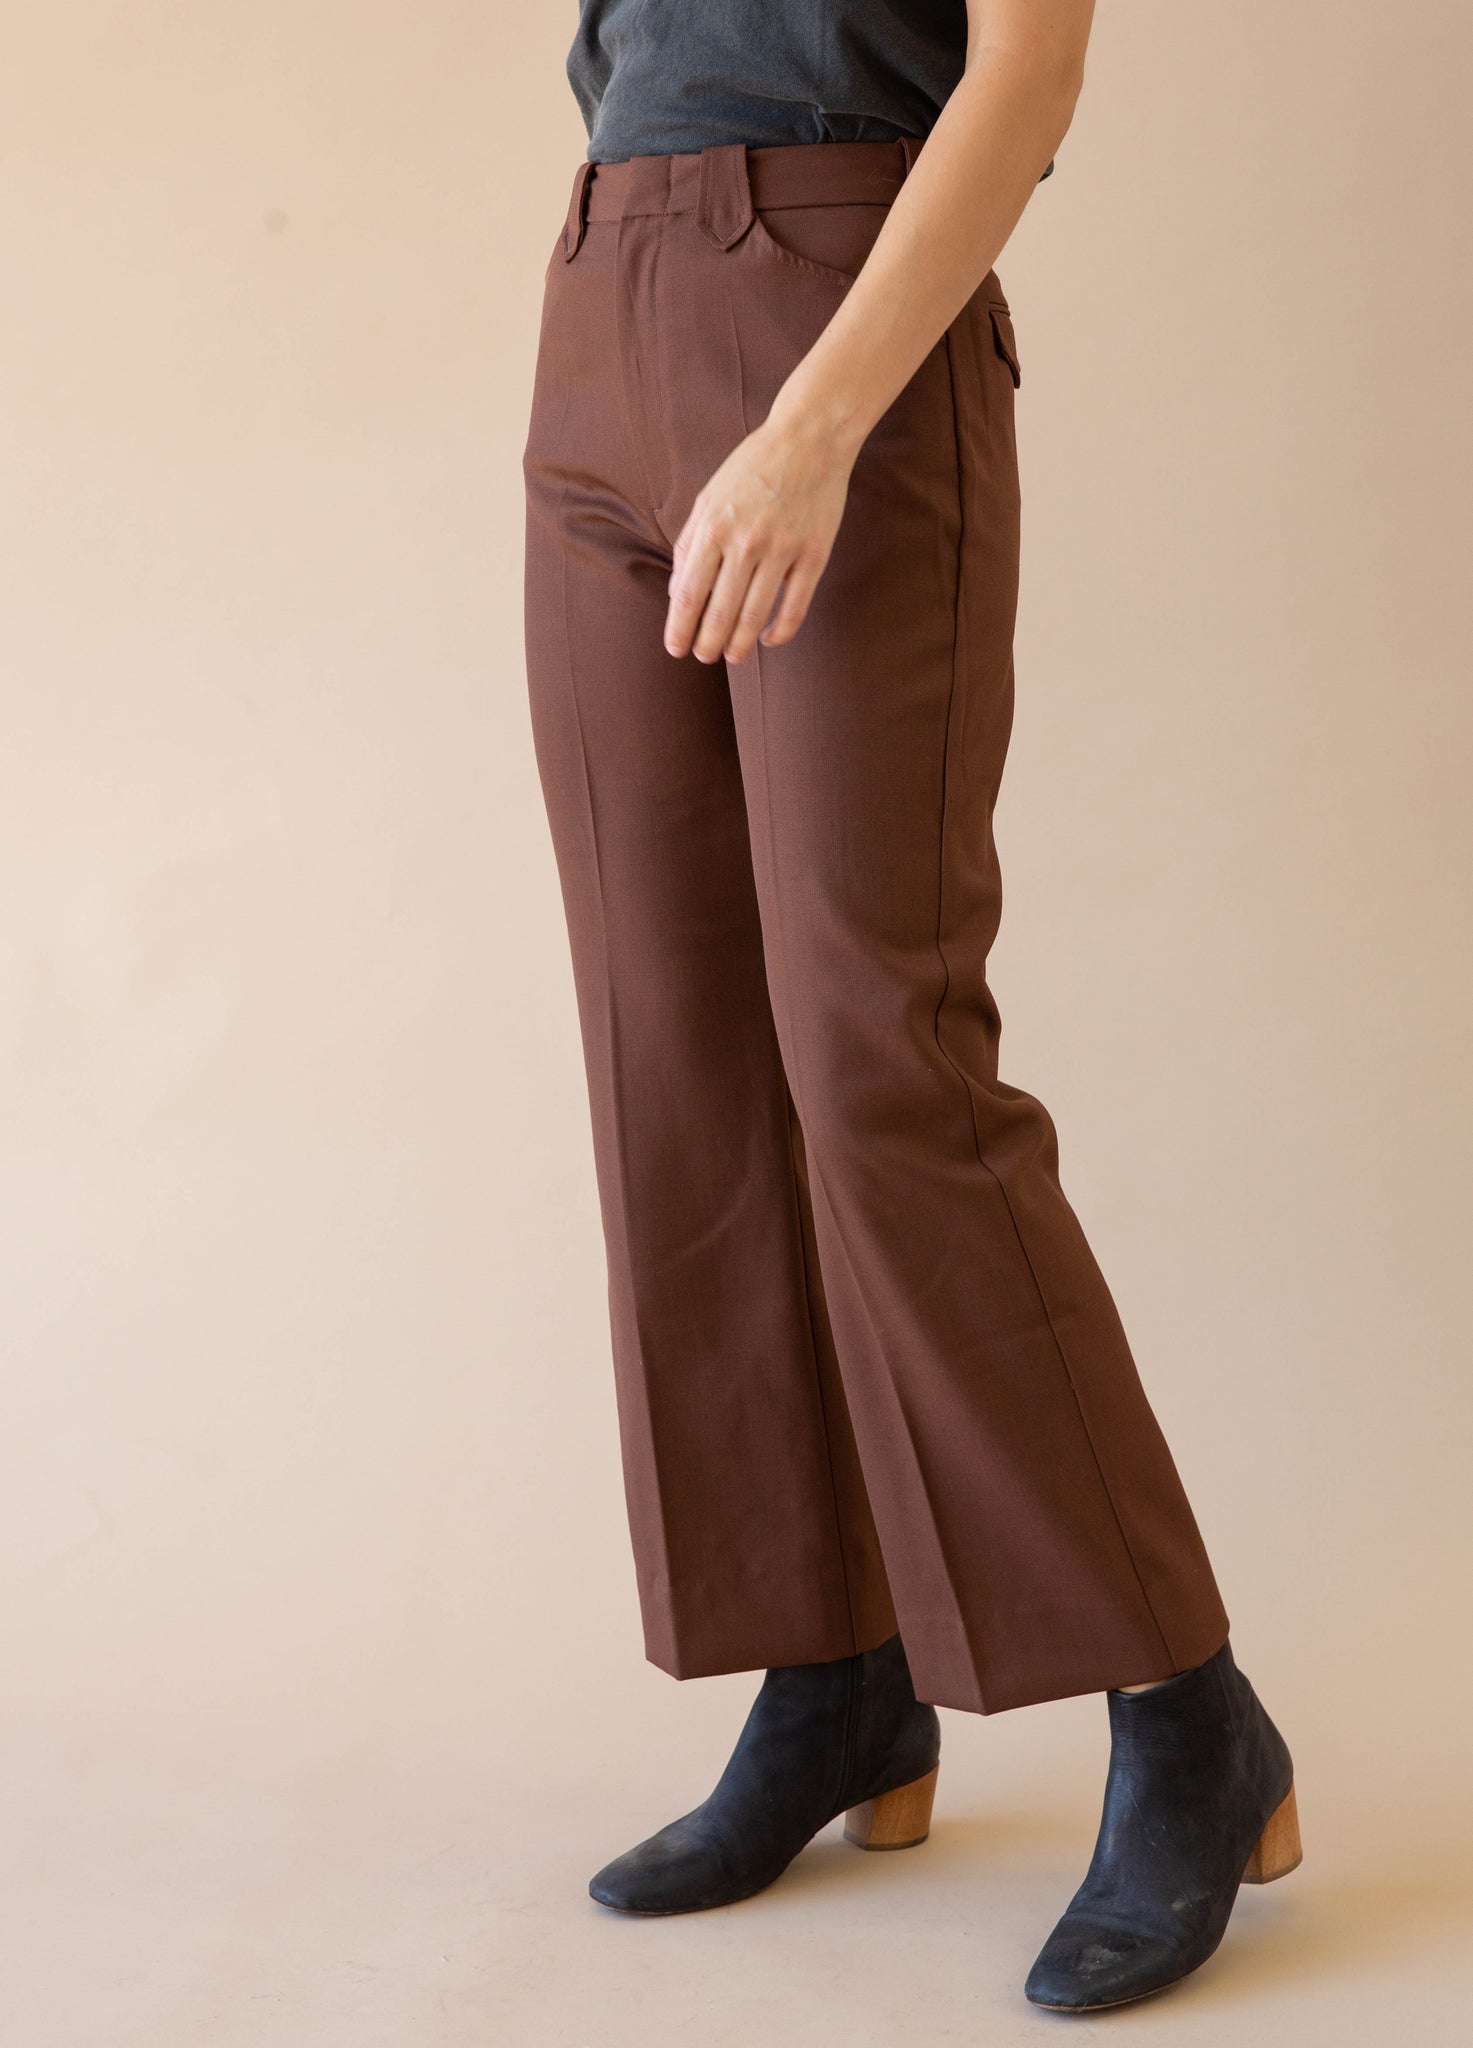 The Great Western Trouser